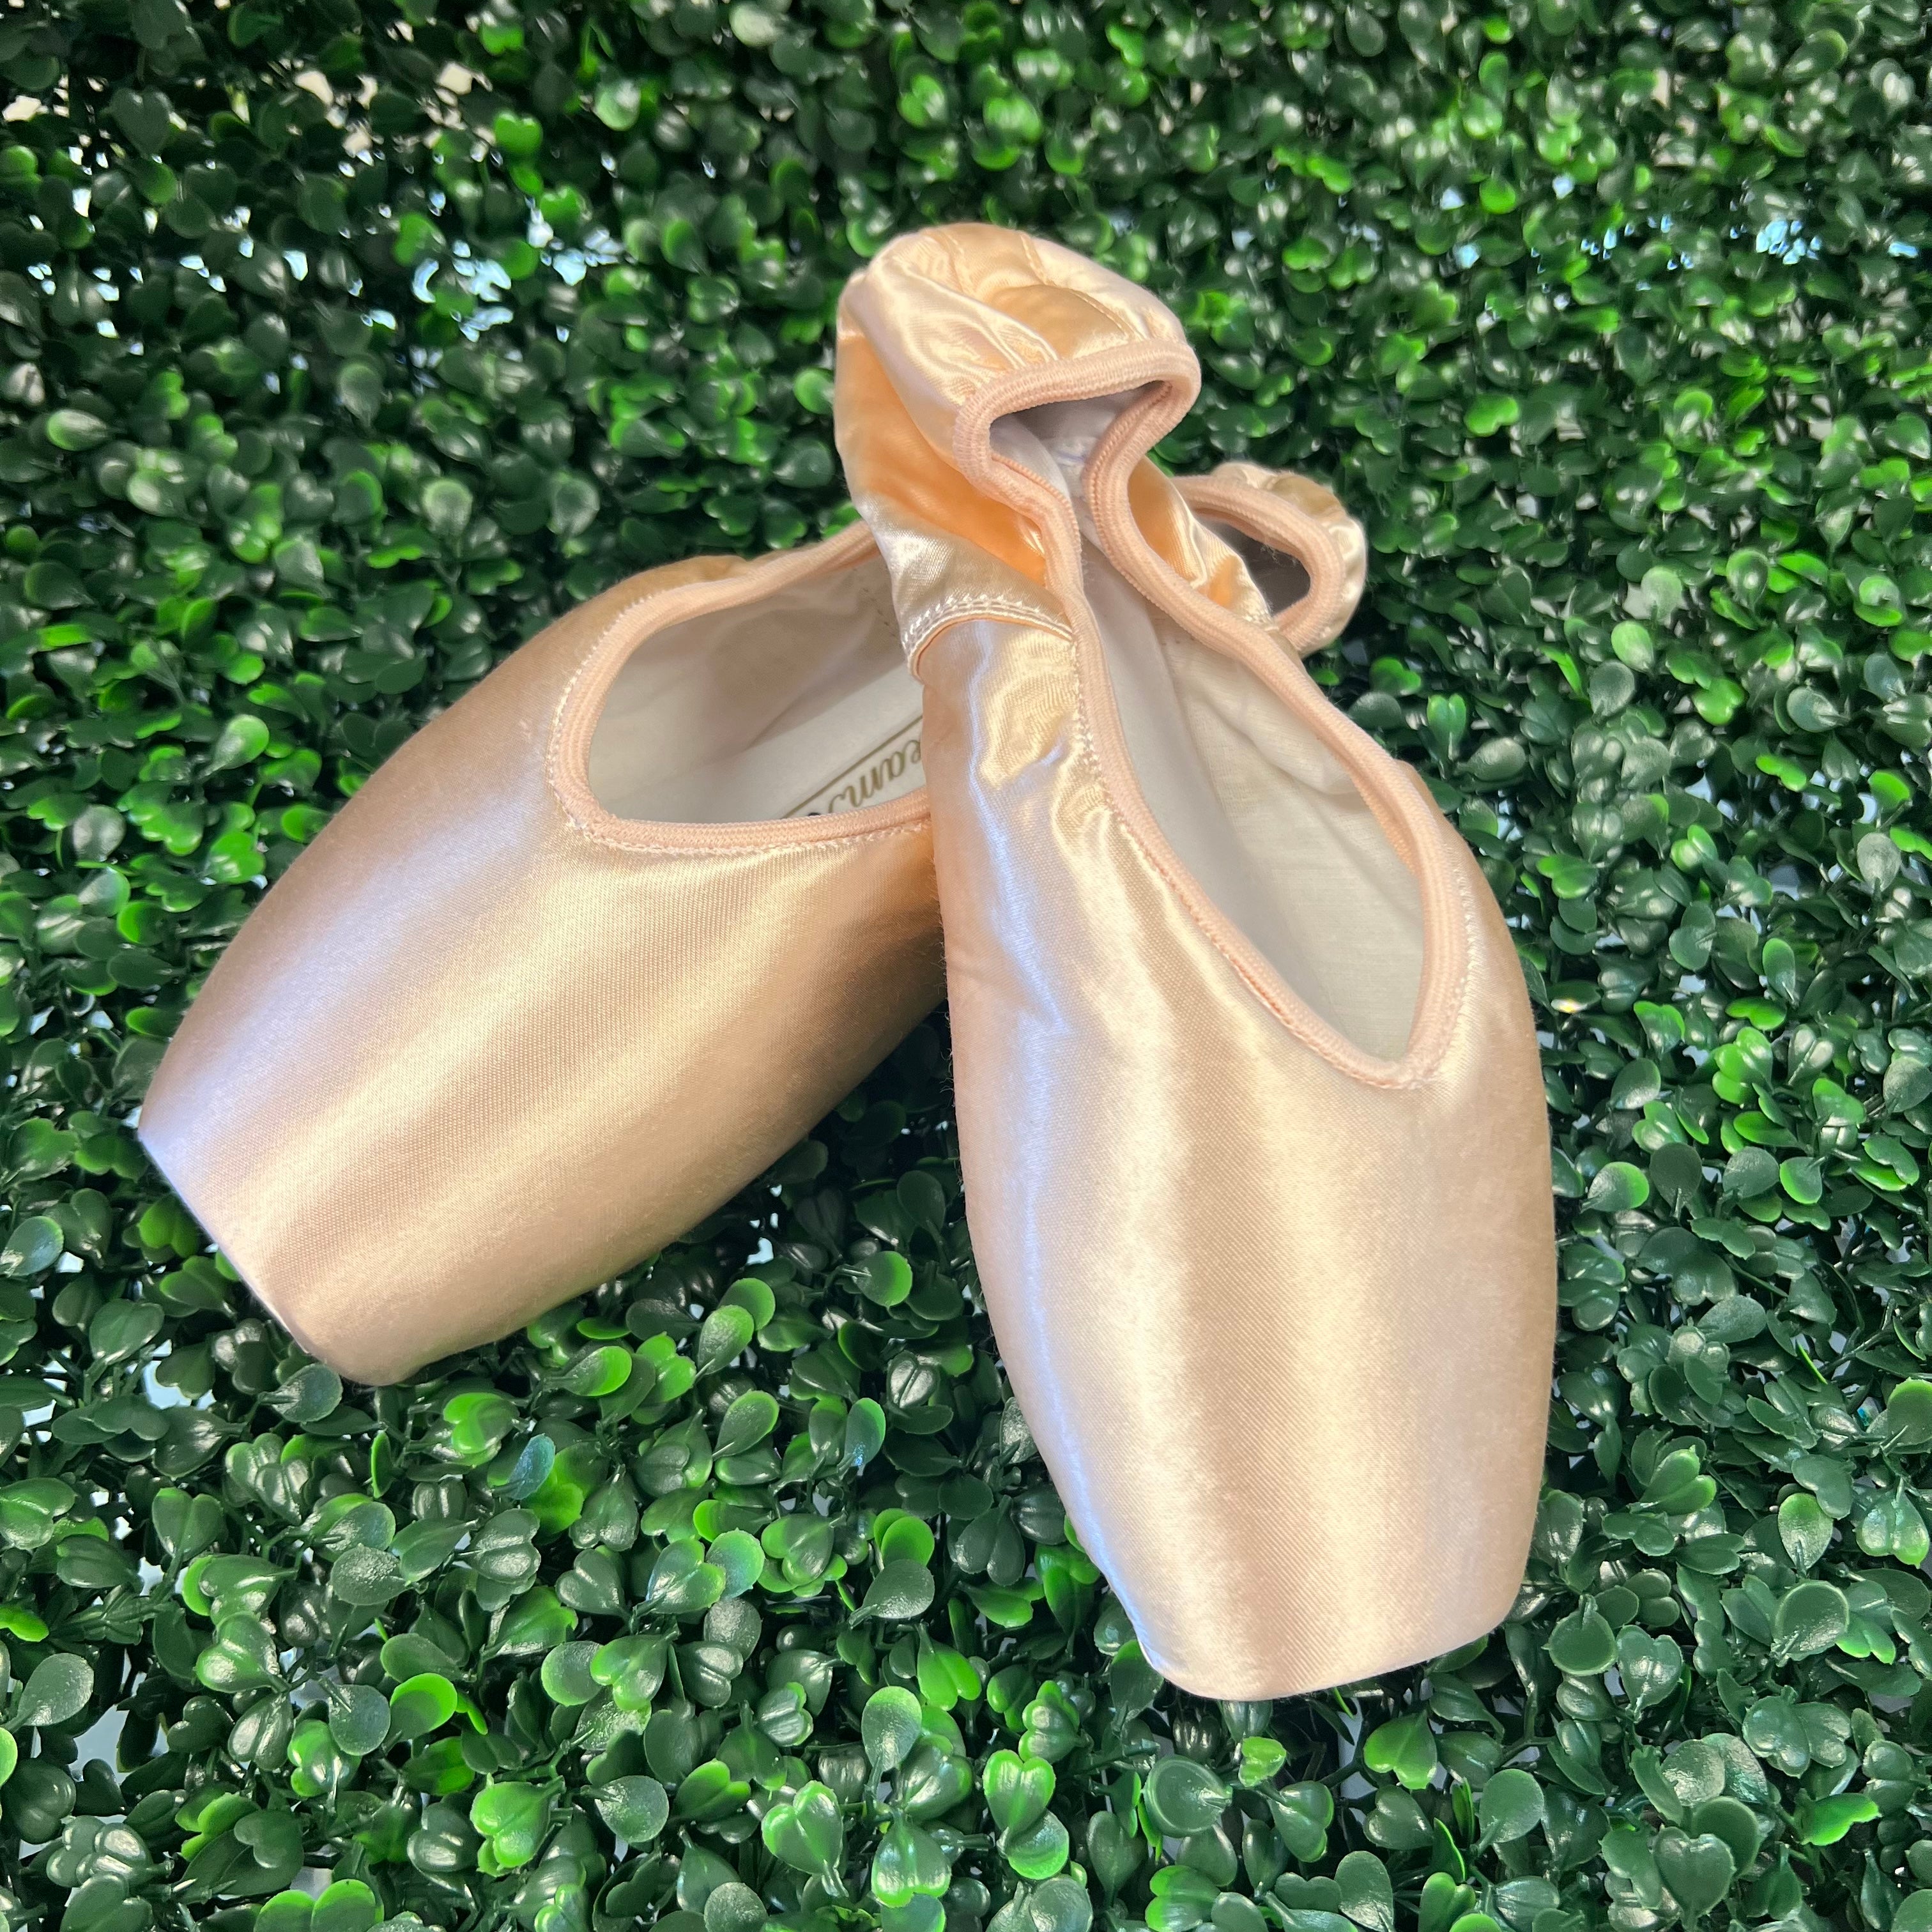 Pointe shoe ribbon and elastic